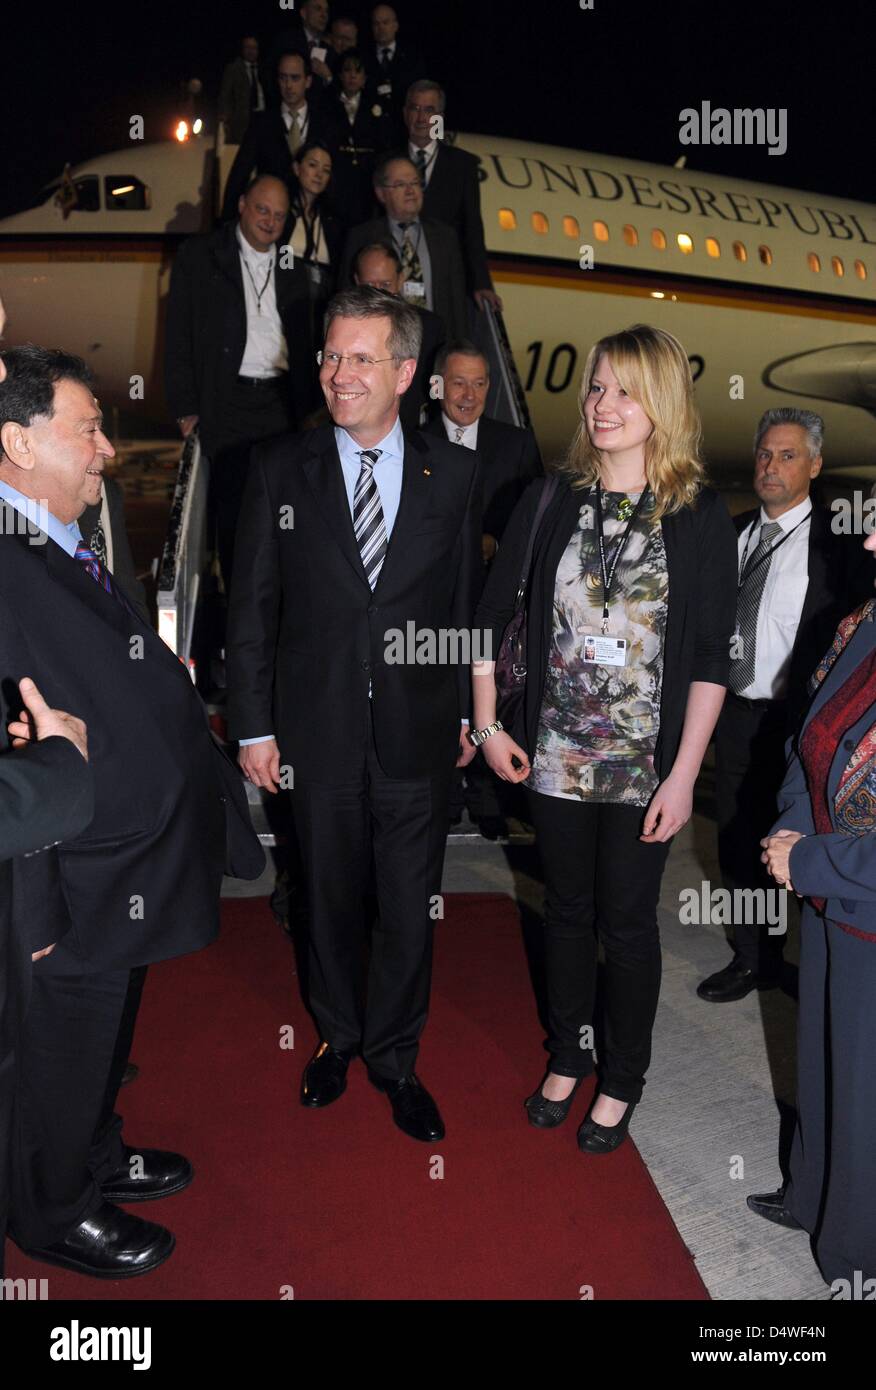 German President Christian Wulff and daughter Annalena are welcomed by Israel's Minister of Industry, Trade and Labour, Binyamin Ben-Eliezer, (L) in Tel Aviv, Israel, 27 November 2010. Wulff's 17-year-old daughter accompanies Mr Wulff on his four-day visit to Israel in stead of his wife Bettina. The choice of travel companion is supposed to symbolize the importance of transmitting  Stock Photo